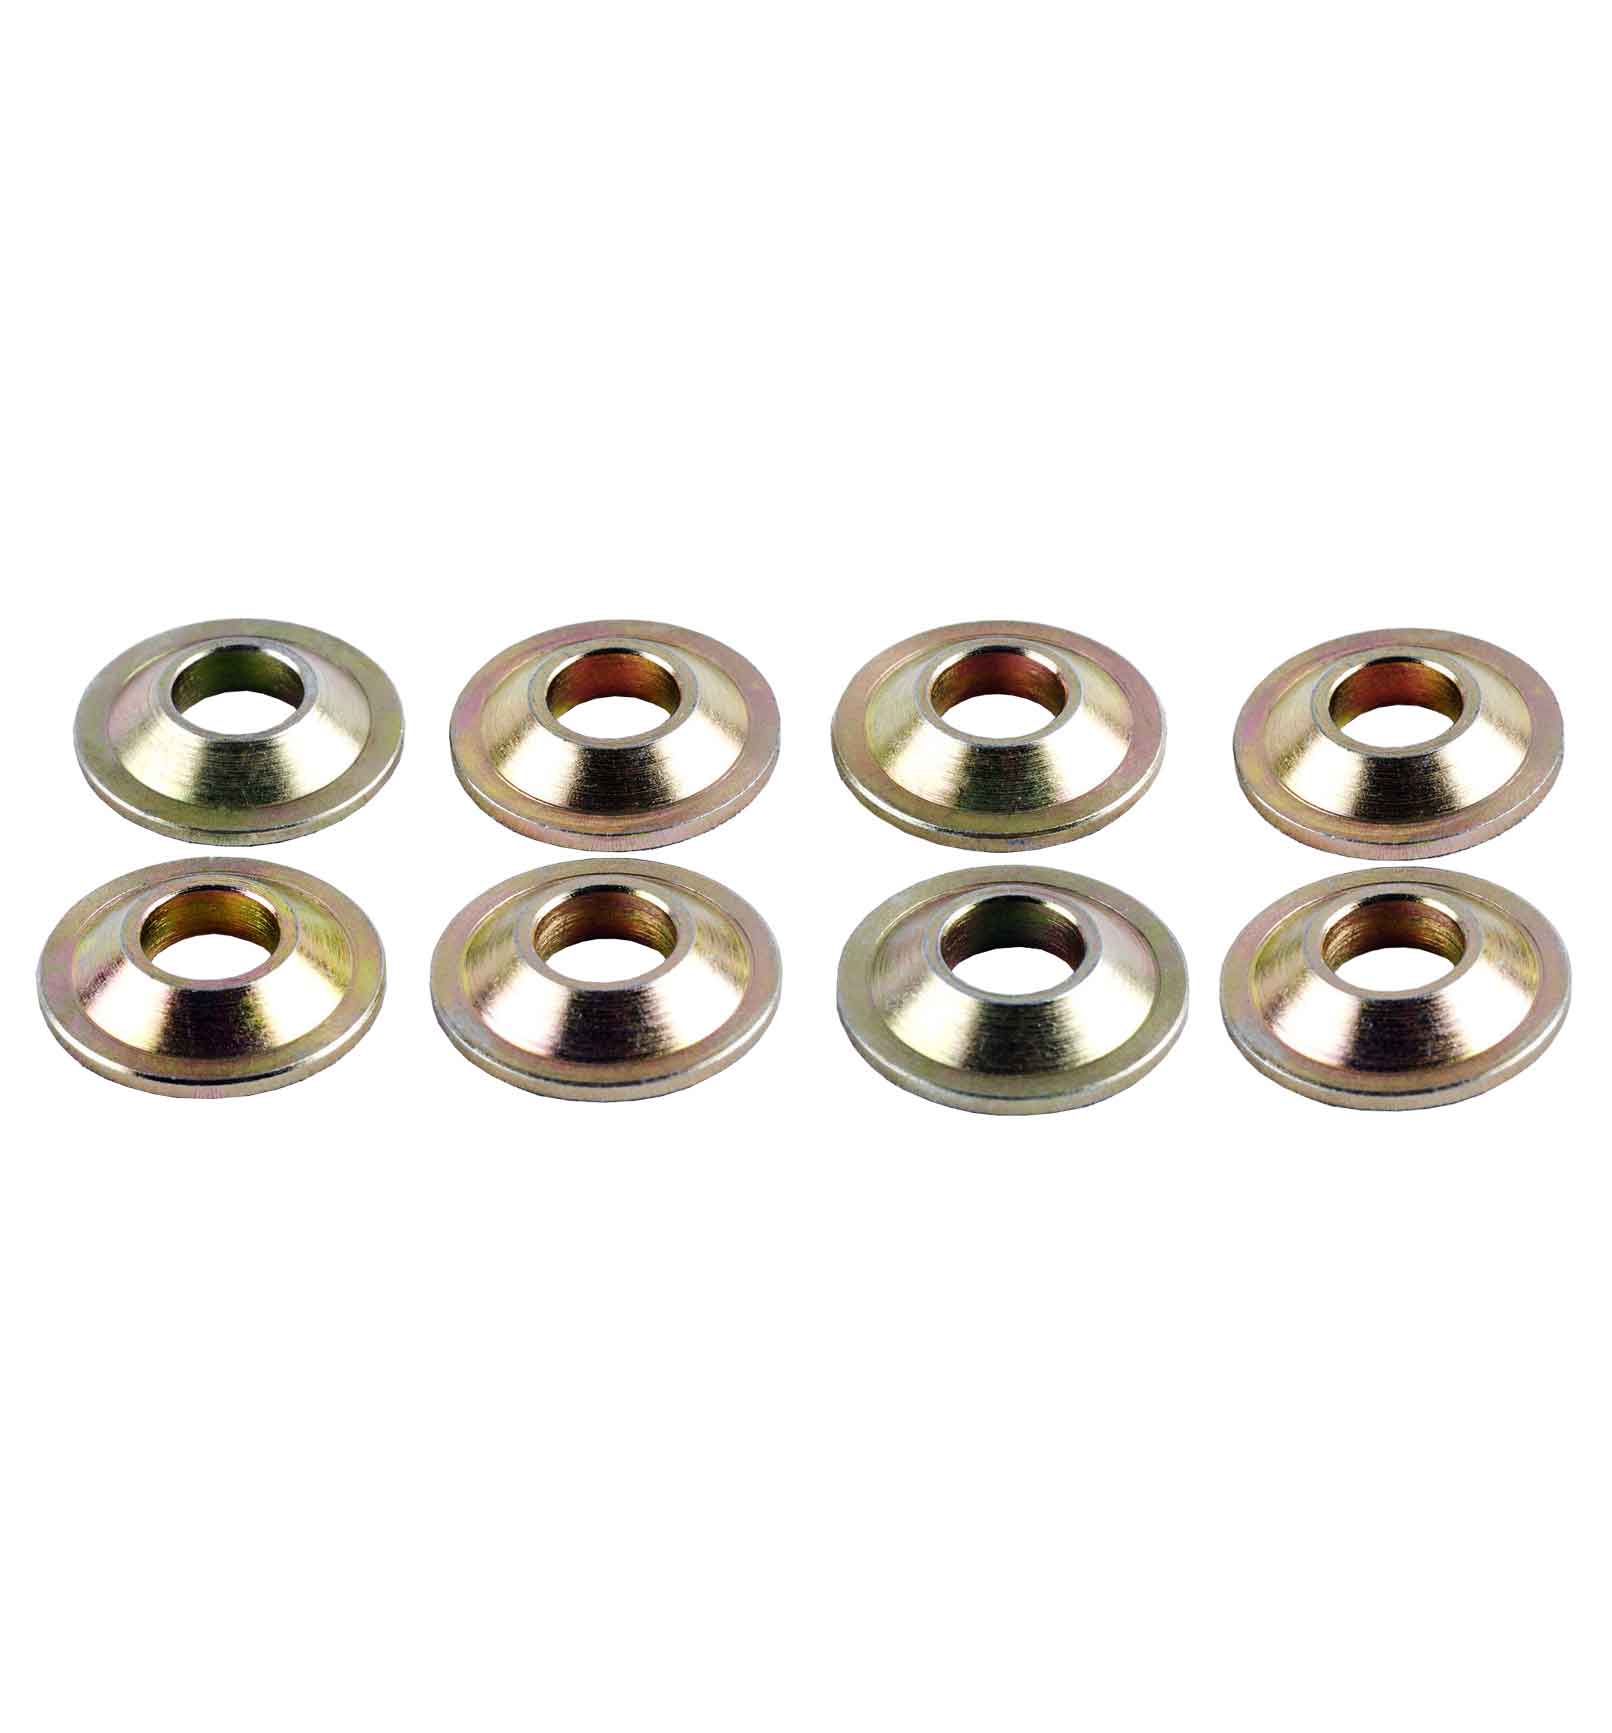 M10 Rod End Misalignment Spacers 10mm (Pack of 8)